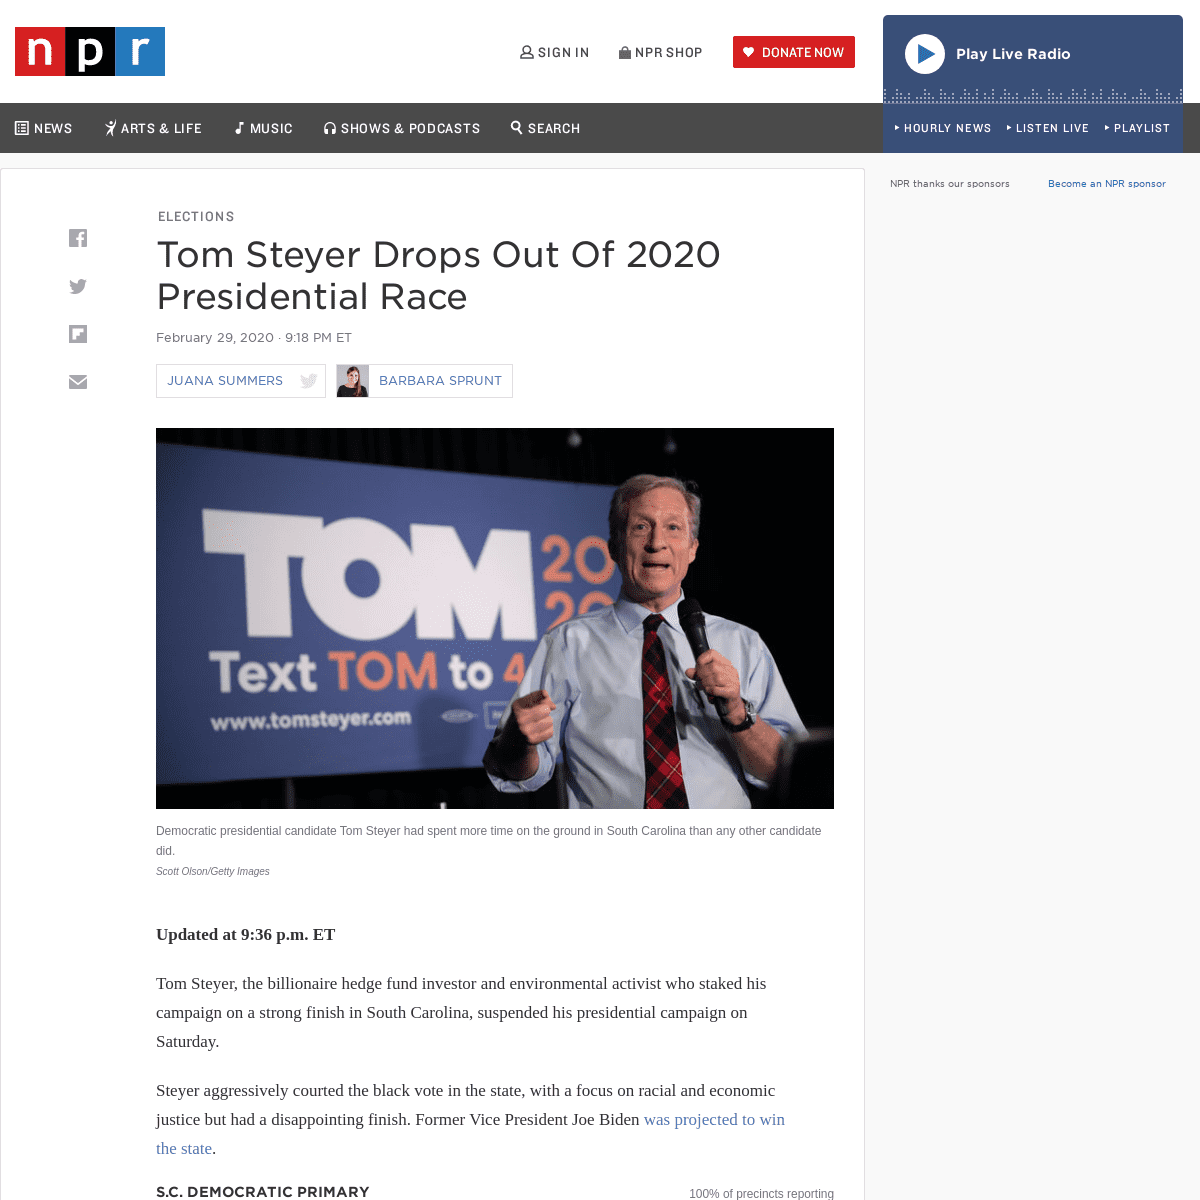 A complete backup of www.npr.org/2020/02/29/801952931/tom-steyer-to-drop-out-of-2020-presidential-race